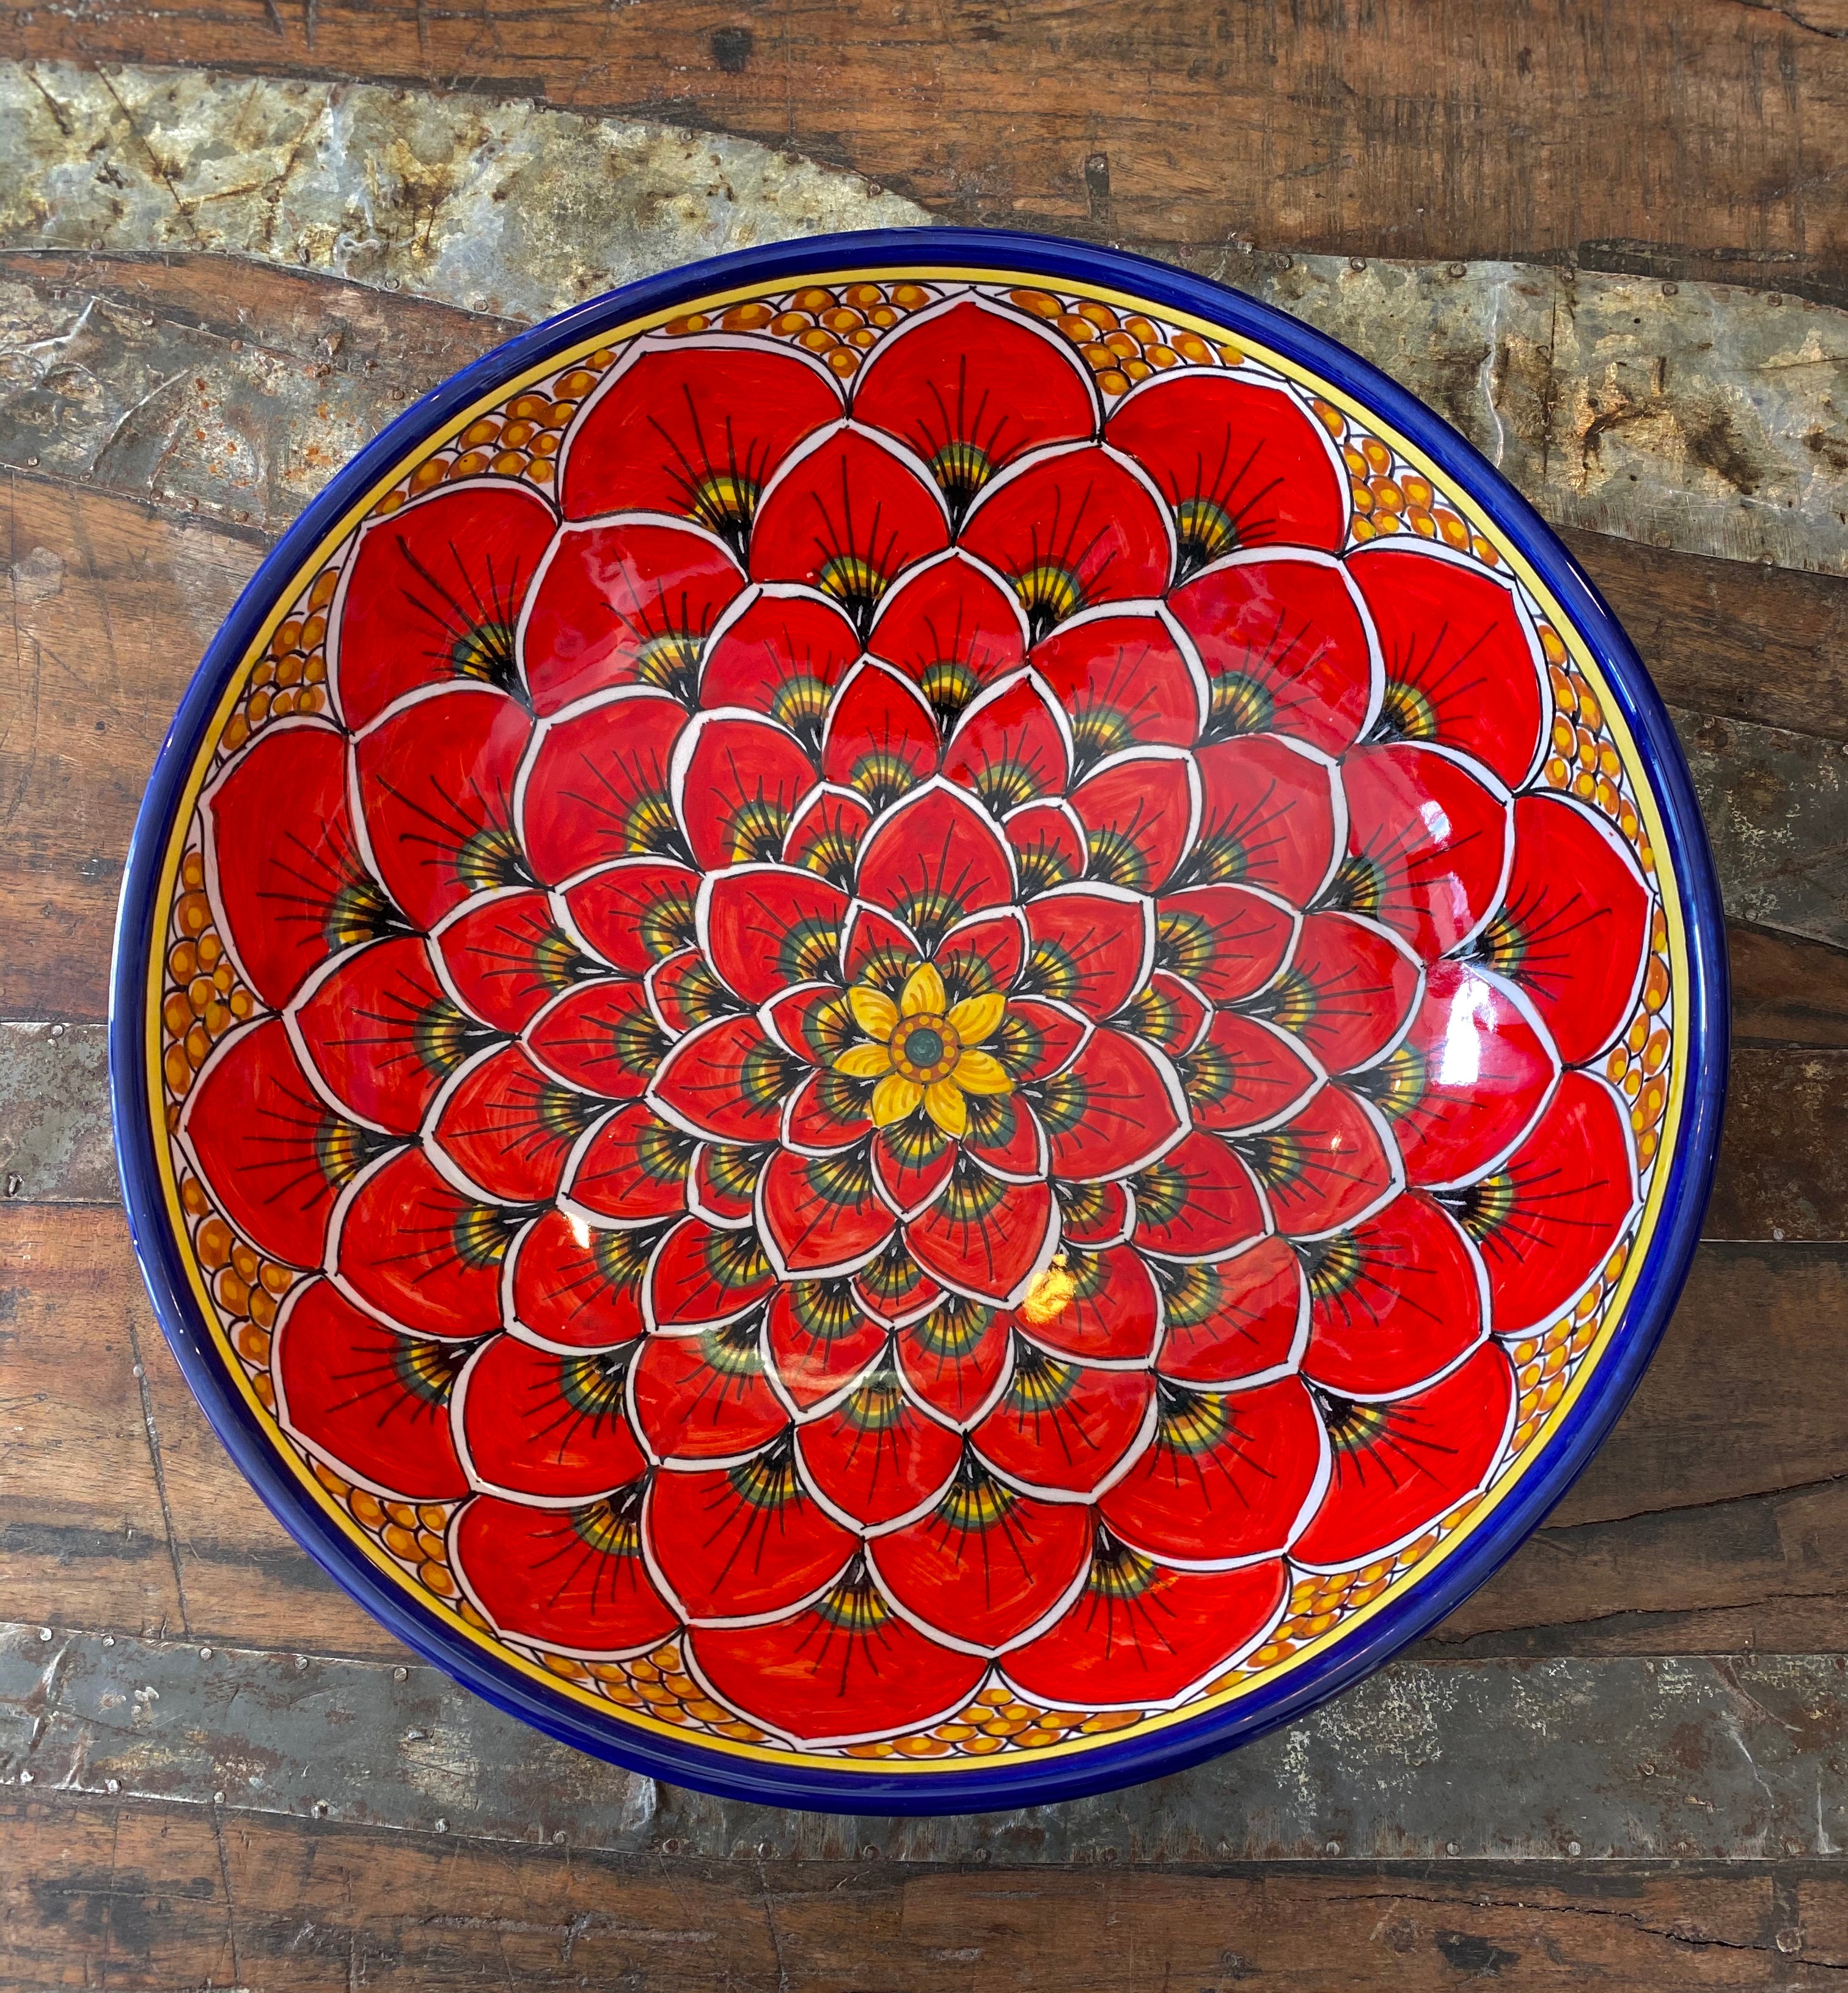 Geribi Salad Bowl (PG04) Red Peacock Design, ceramics, pottery, italian design, majolica, handmade, handcrafted, handpainted, home decor, kitchen art, home goods, deruta, majolica, Artisan, treasures, traditional art, modern art, gift ideas, style, SF, shop small business, artists, shop online, landmark store, legacy, one of a kind, limited edition, gift guide, gift shop, retail shop, decorations, shopping, italy, home staging, home decorating, home interiors